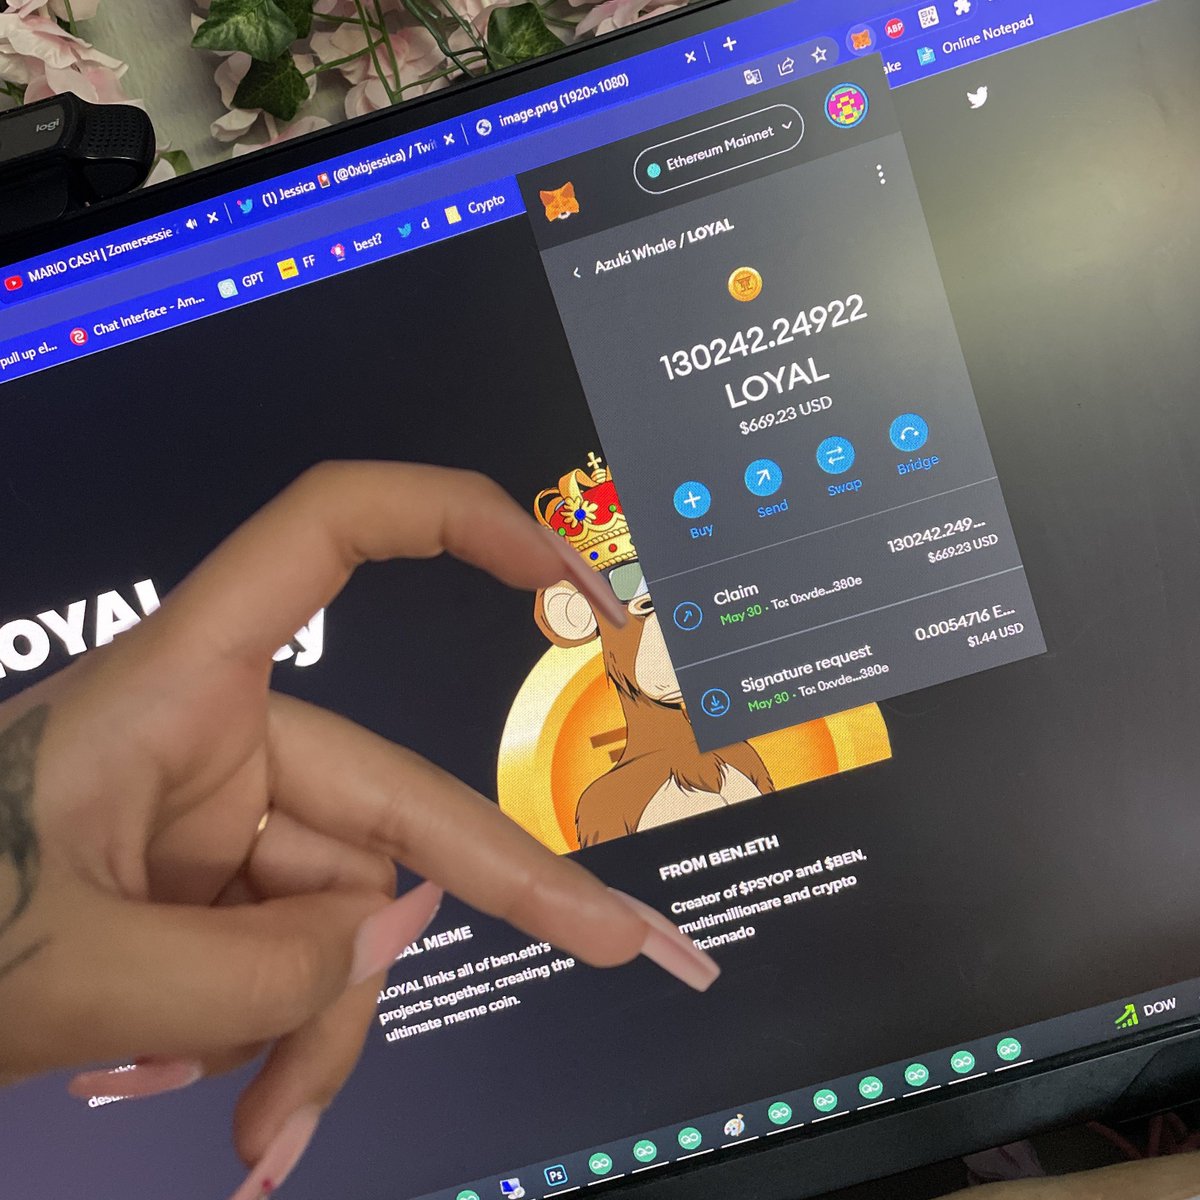 omg i just claimed $670 from the $LOYAL airdrop? claim now 👇

🔗 loyal.financial 🎁

#NFTs $XEN $APE #ETH #altcoins $LINK $DOGE $XRP $PEPE $MONG $BOB $WAGMI #MATIC $CAW $SHIB $FLOKI $DAVE $PSYOP $BEN #USDT $BTC $ADA #crypto #WOJAK #MATIC BTC $HABIBI $SUI Ether #USDC